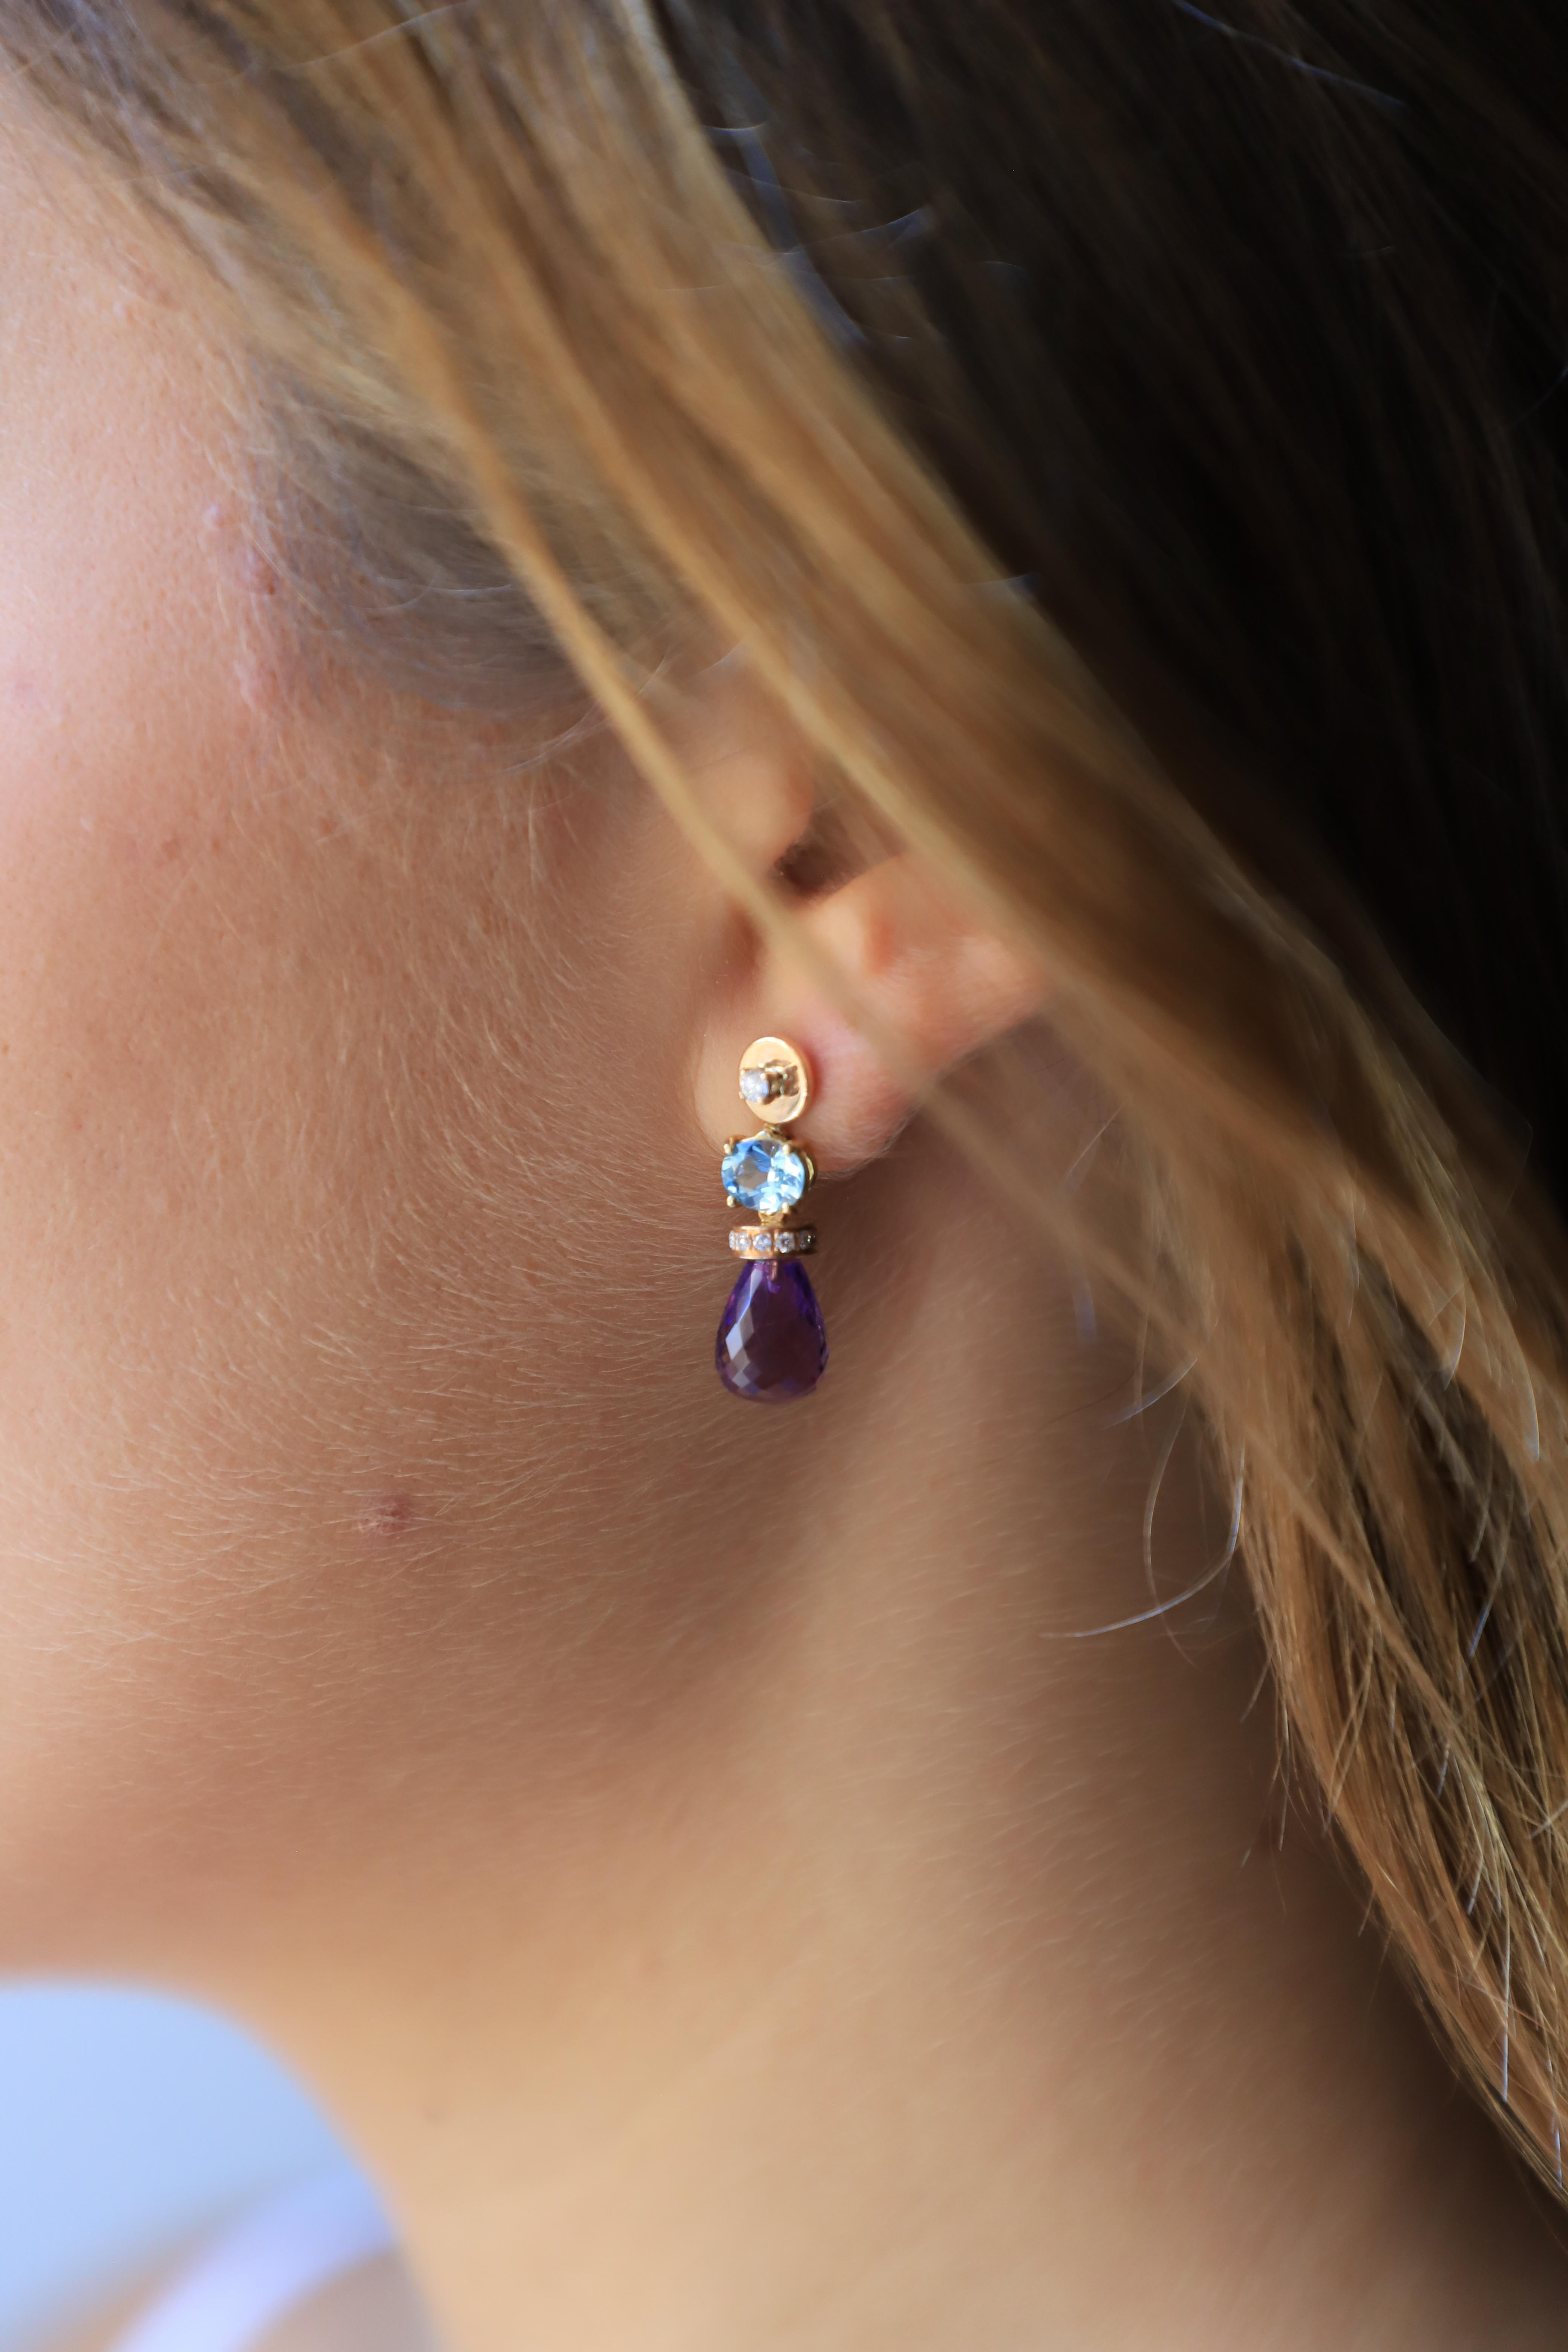 Rossella Ugolini design collection
Here there are some beautiful grape earrings handcrafted in 18 karats Rose Gold and embellished with 0.30 Karats White Diamonds, Blue Topaz and Amethyst. 
This piece is entirely manufactured, in an artisanal way,